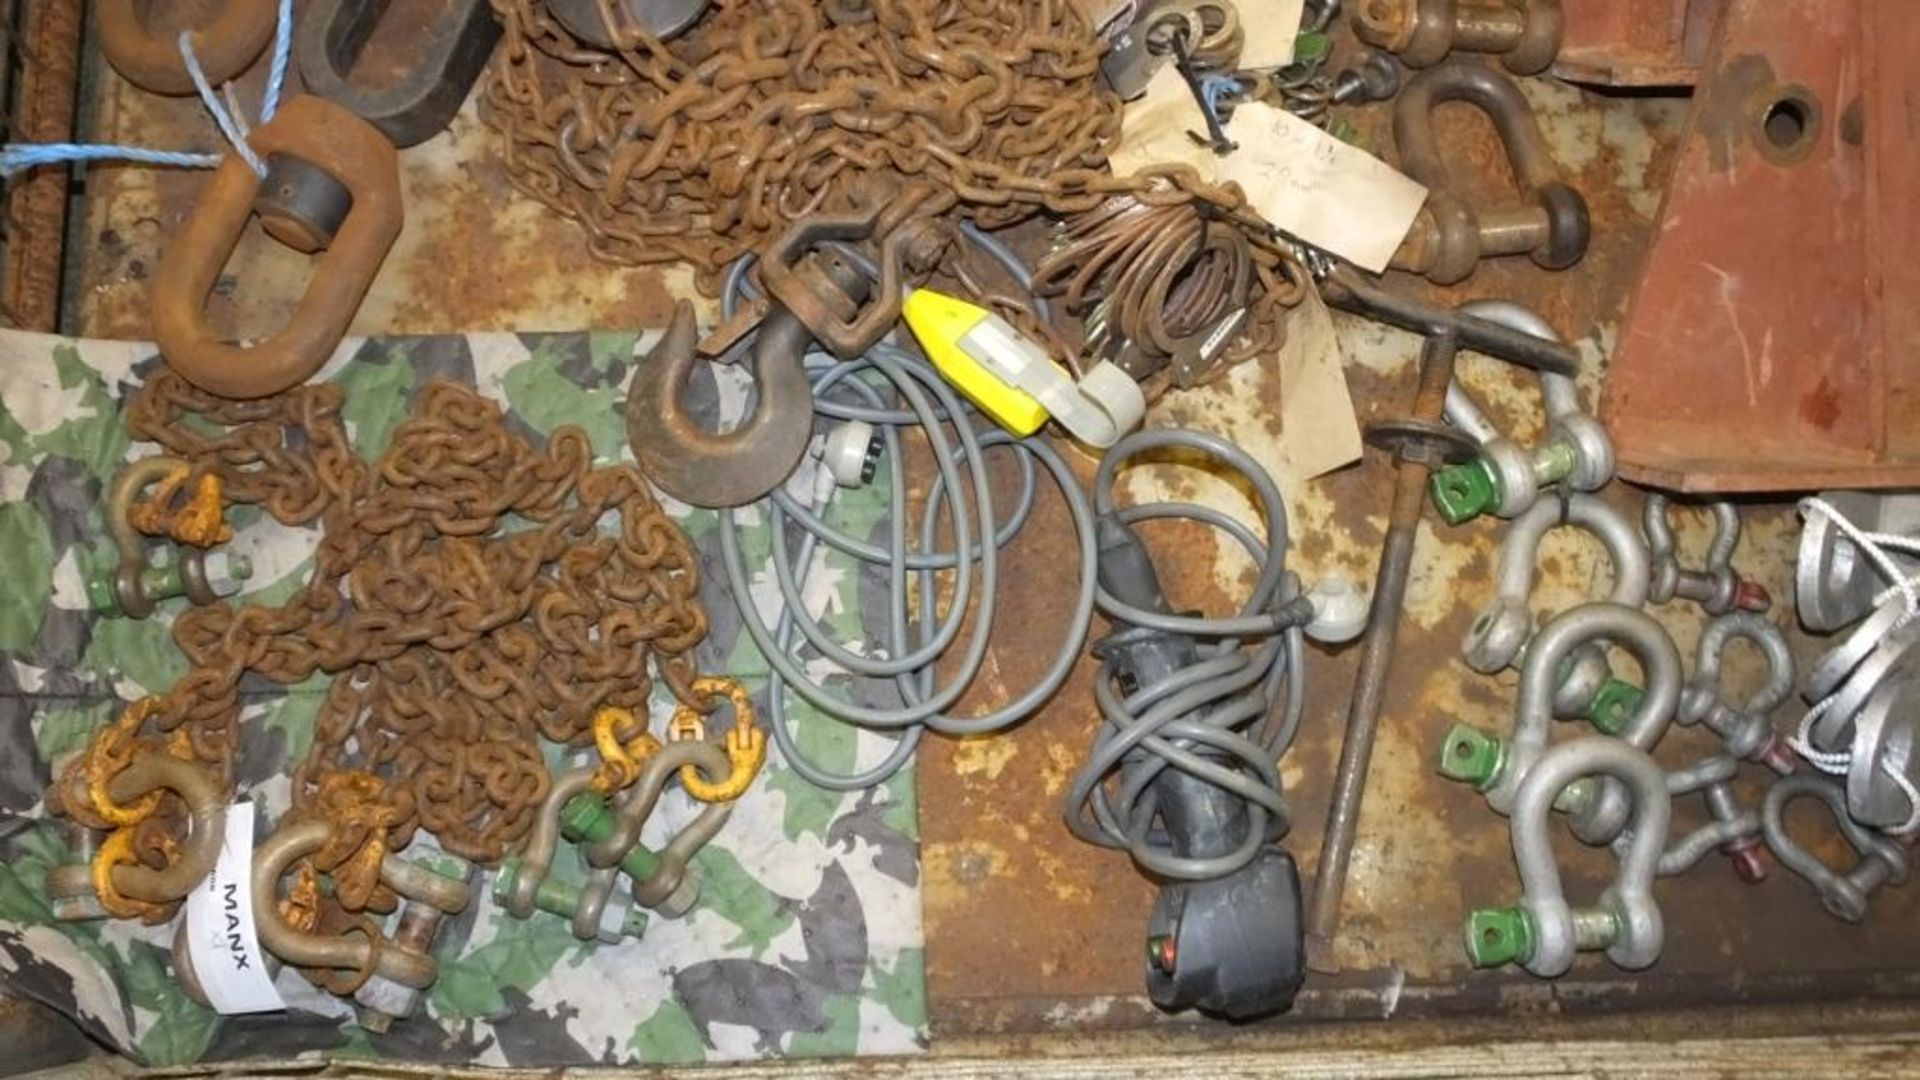 Lifting equipment - Chain, D clamps, Shackles, 2T Block and Tackle Chain (FECO), Various s - Image 3 of 4